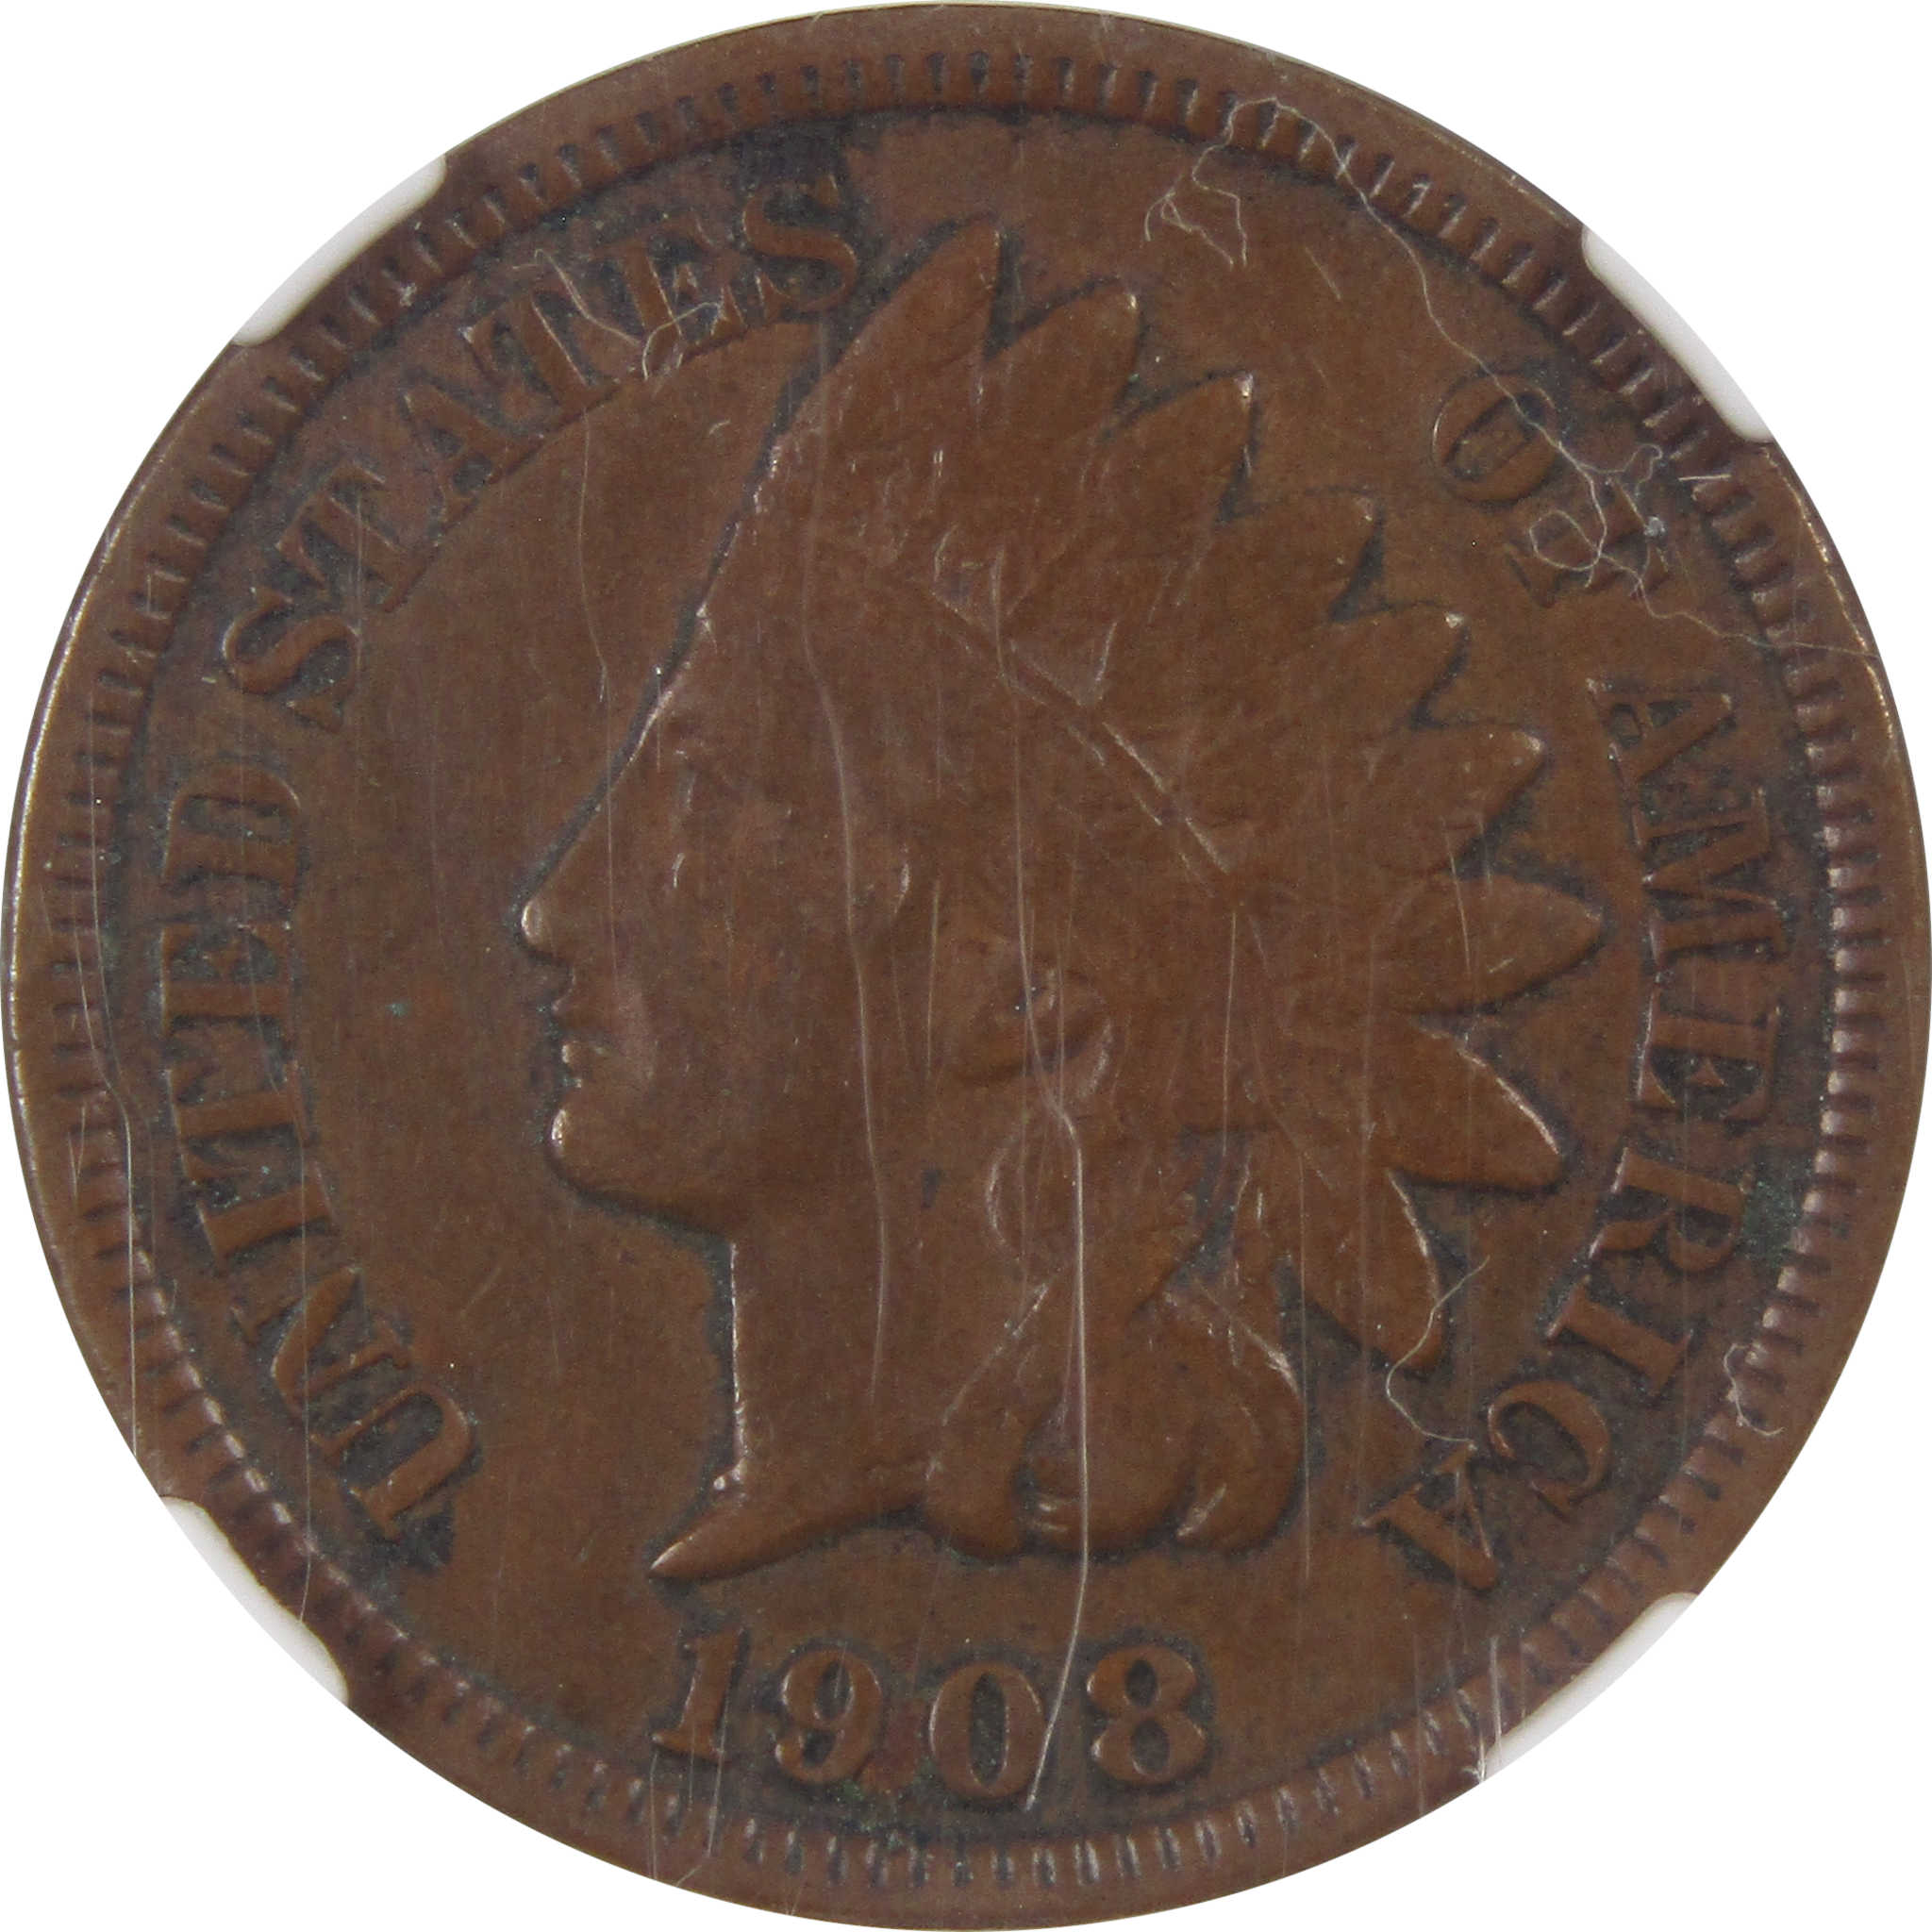 1908 S Indian Head Cent XF 40 BN NGC Bronze Penny 1c US Coin SKU:I3528